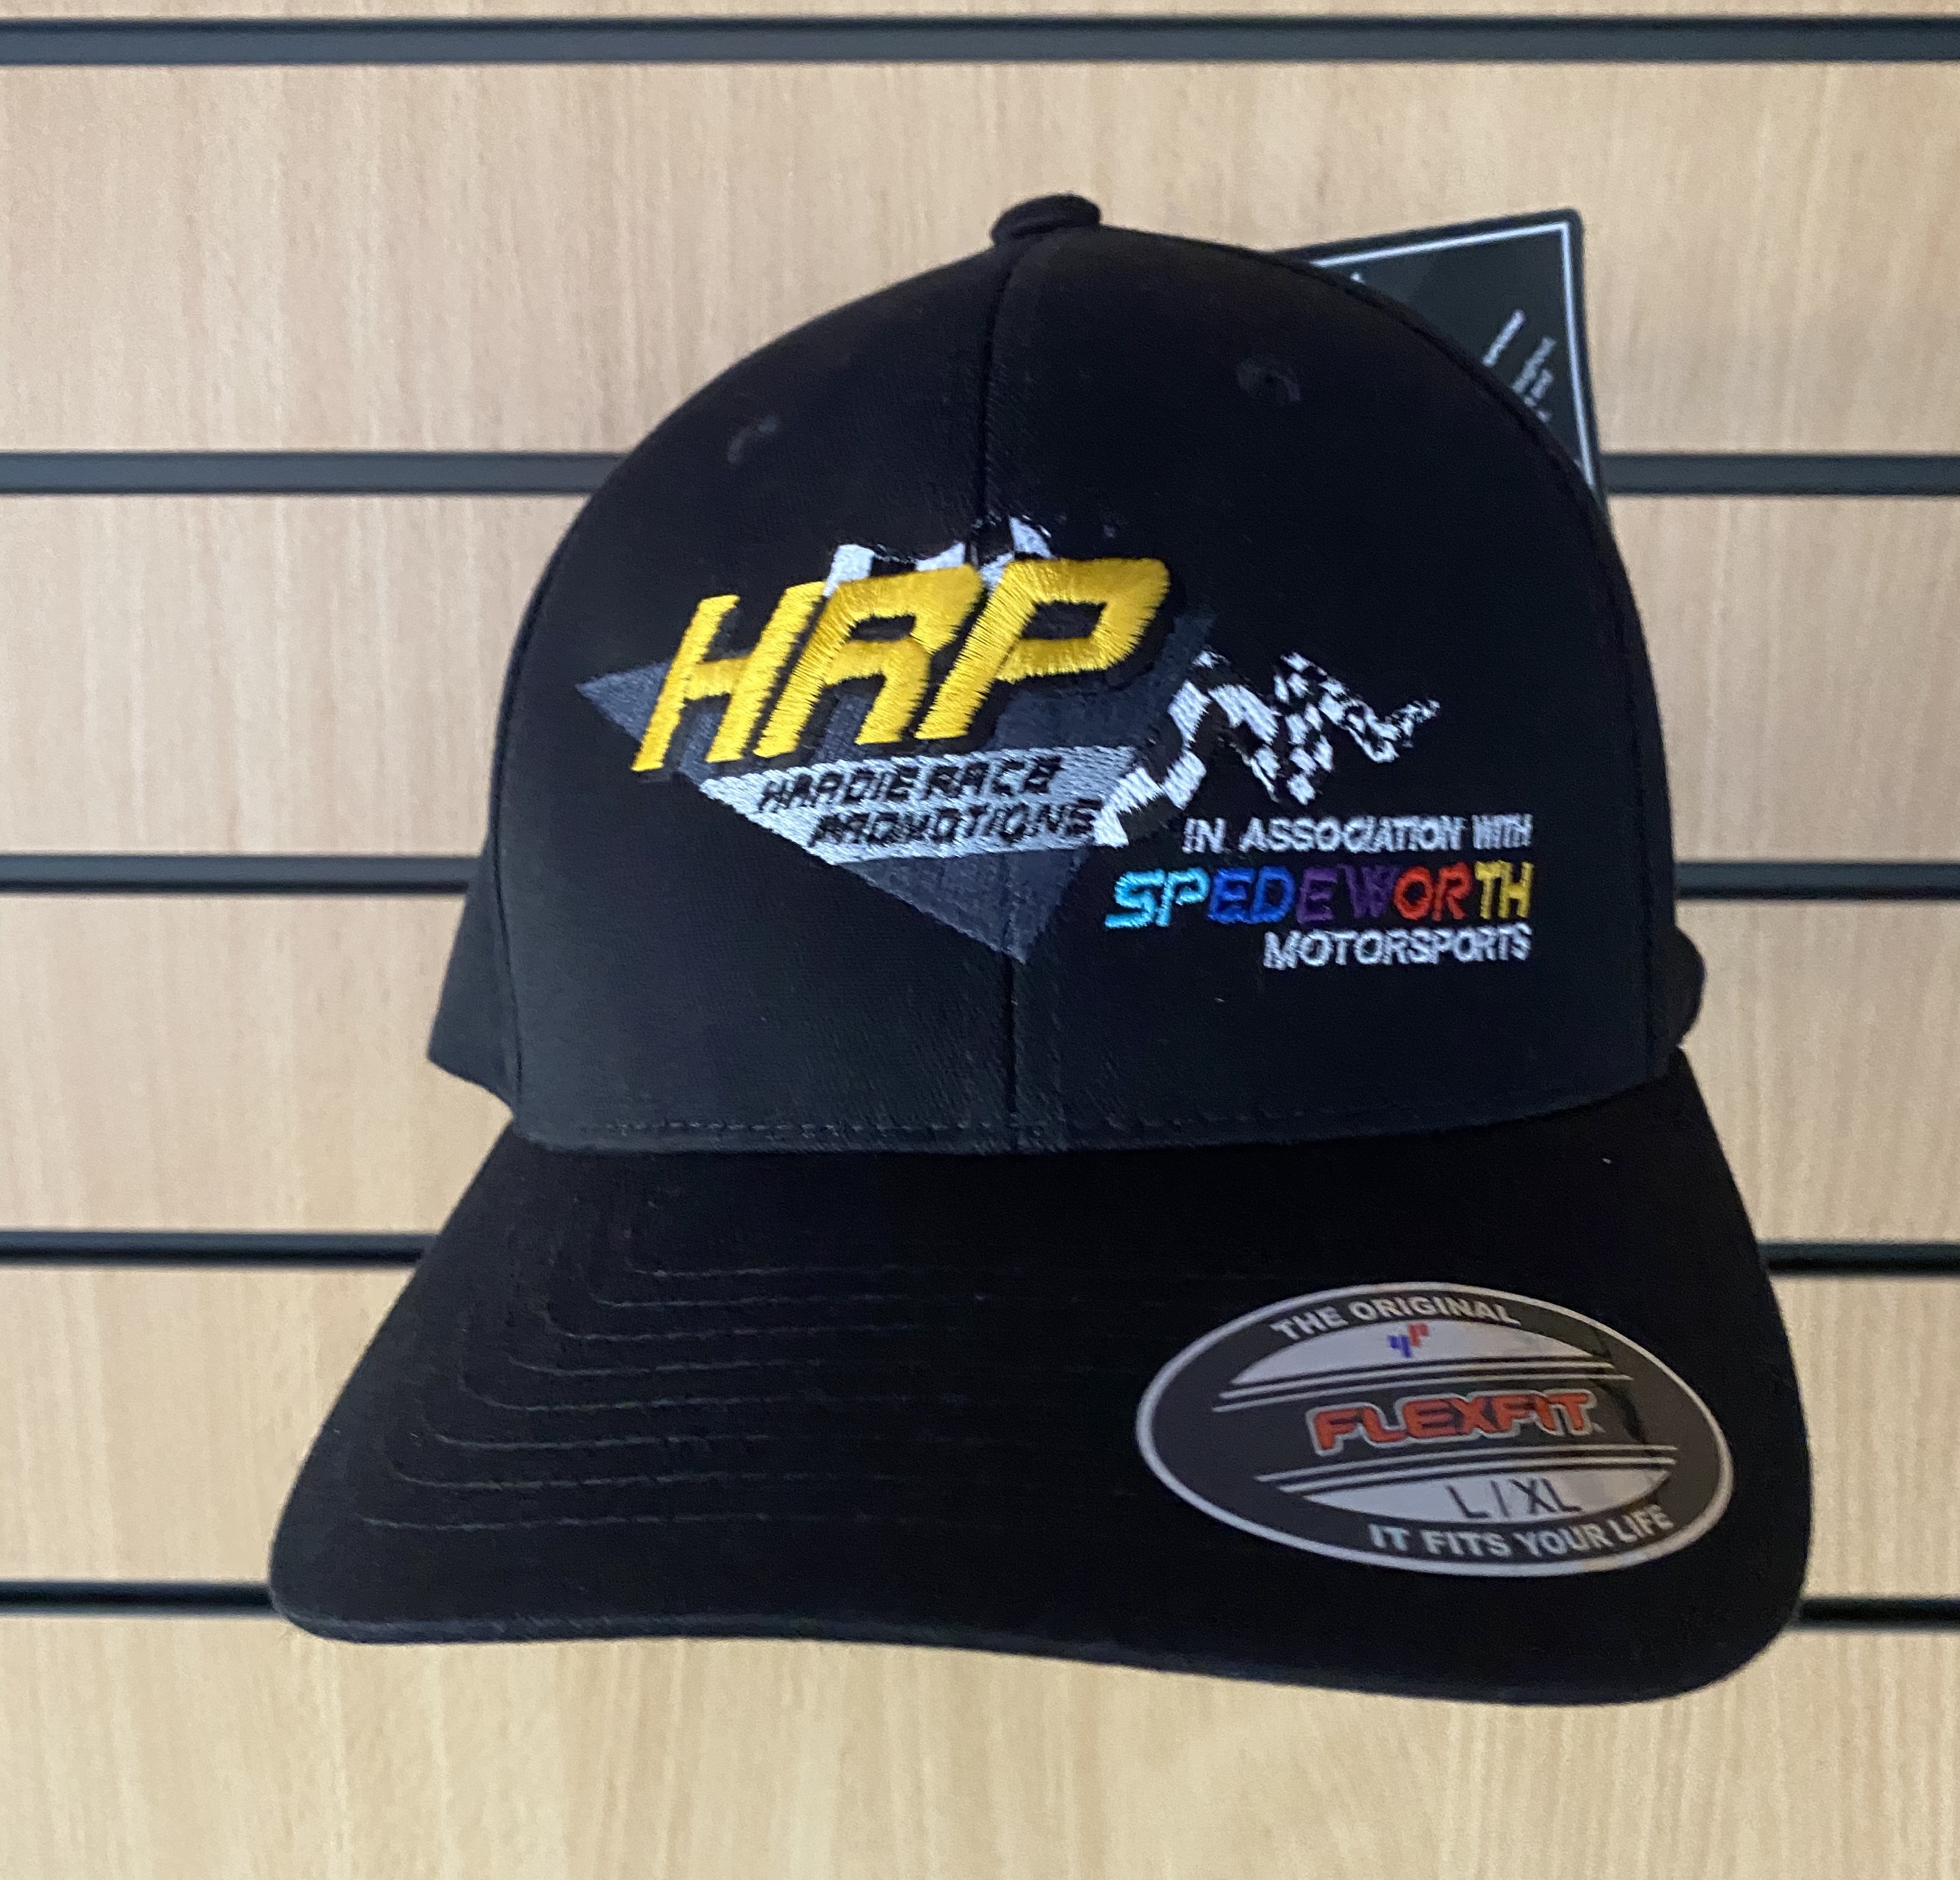 New for 2020 - HRP Clothing